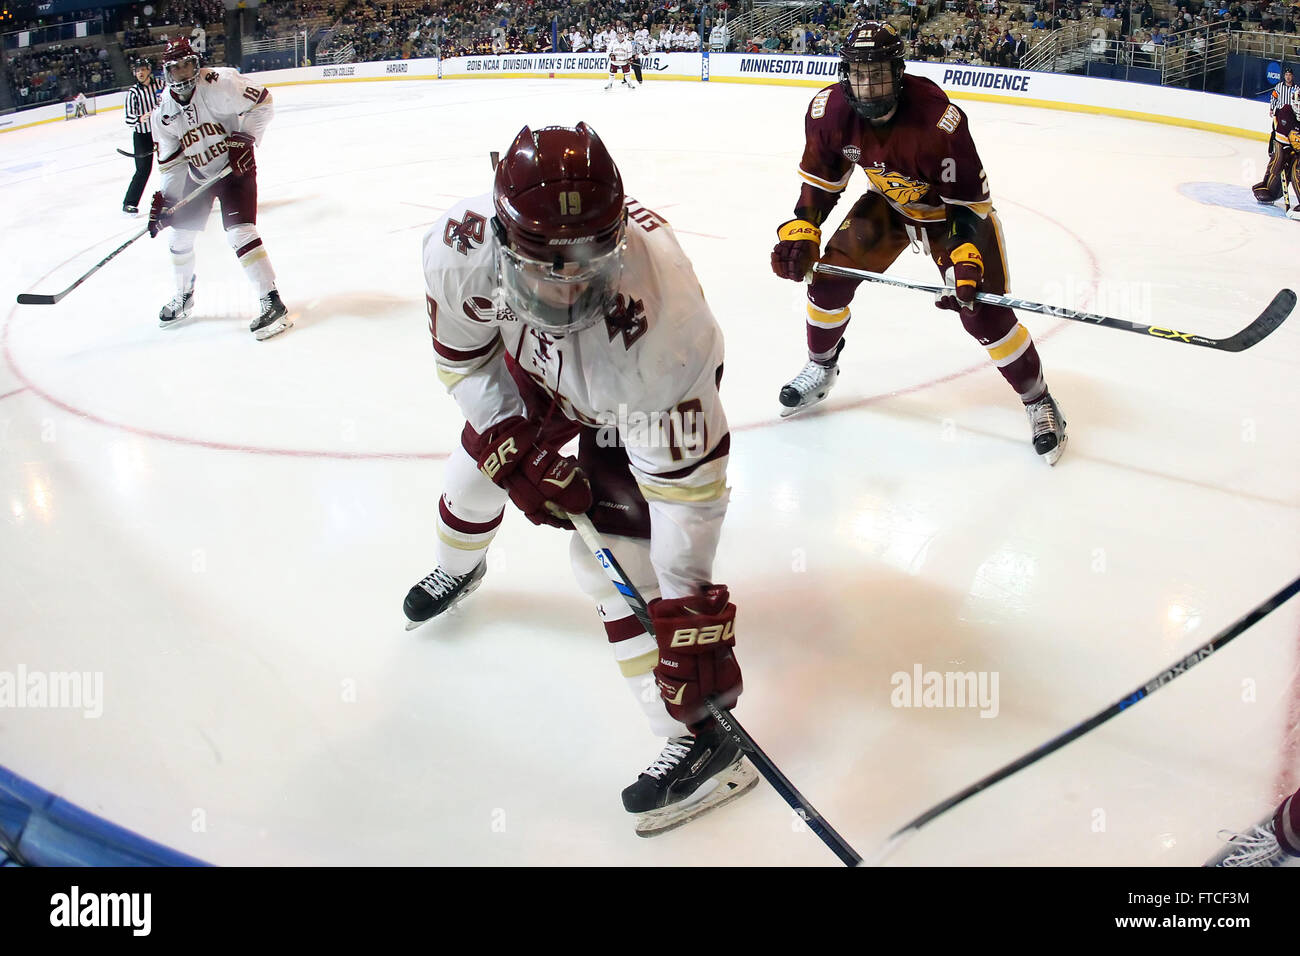 March 26, 2016; Worcester, MA, USA;Boston College Eagles forward Ryan Fitzgerald (19) and Minnesota-Duluth Bulldogs defenseman Carson Soucy (21) in action during the NCAA Northeast Regional Finals hockey game between Minnesota-Duluth and Boston College Eagles at the DCU Center. Boston College defeated Minnesota-Duluth 3-2. Anthony Nesmith/Cal Sport Media Stock Photo